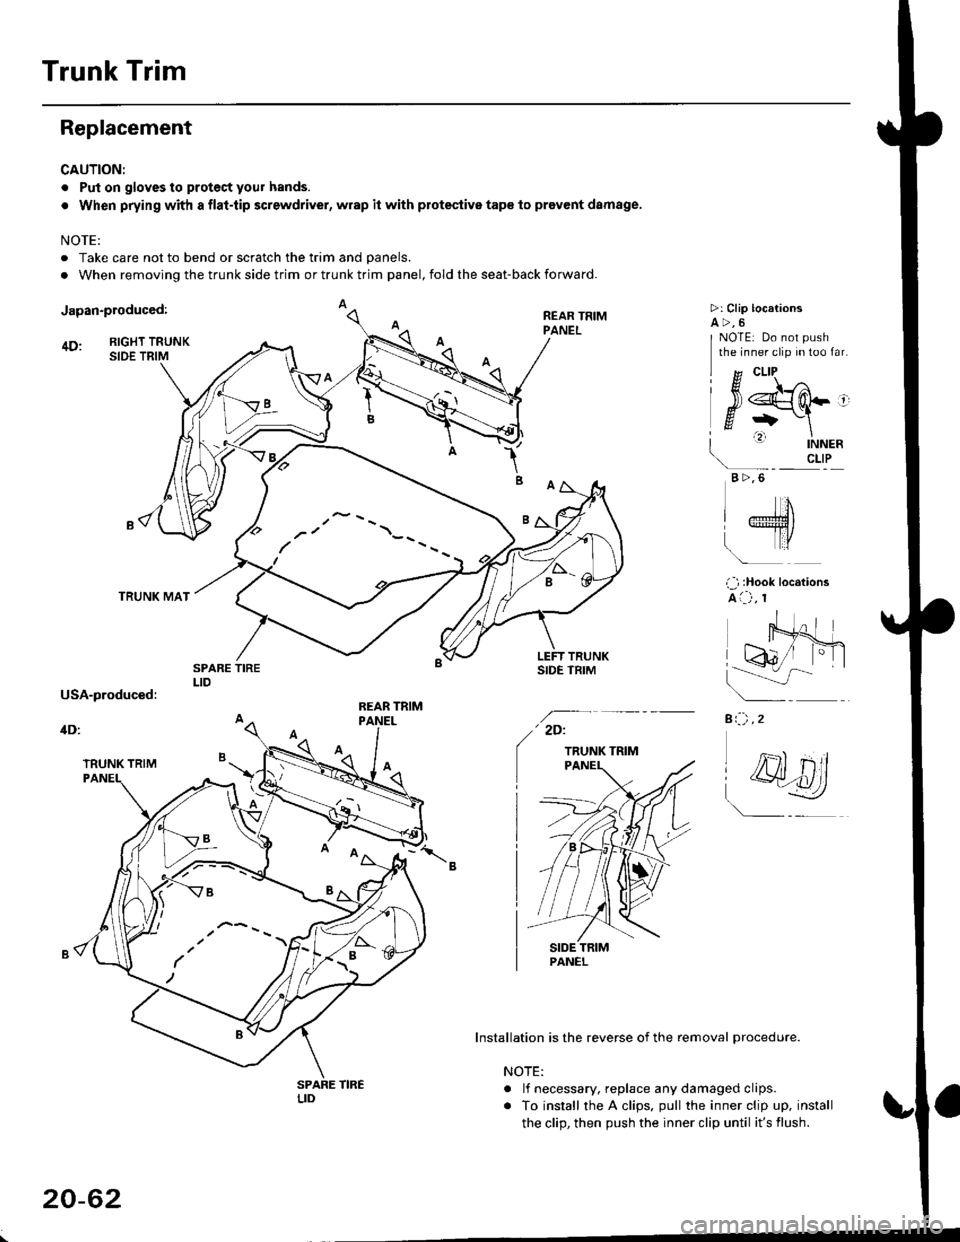 HONDA CIVIC 2000 6.G Workshop Manual Trunk Trim
Replacement
CAUTION:
. Put on gloves to proteci your hands.
. When prying with a flat-tip screwdriver, wrap it with protestive tap€ lo prevent damage.
NOTE:
. Take care not to bend or scr